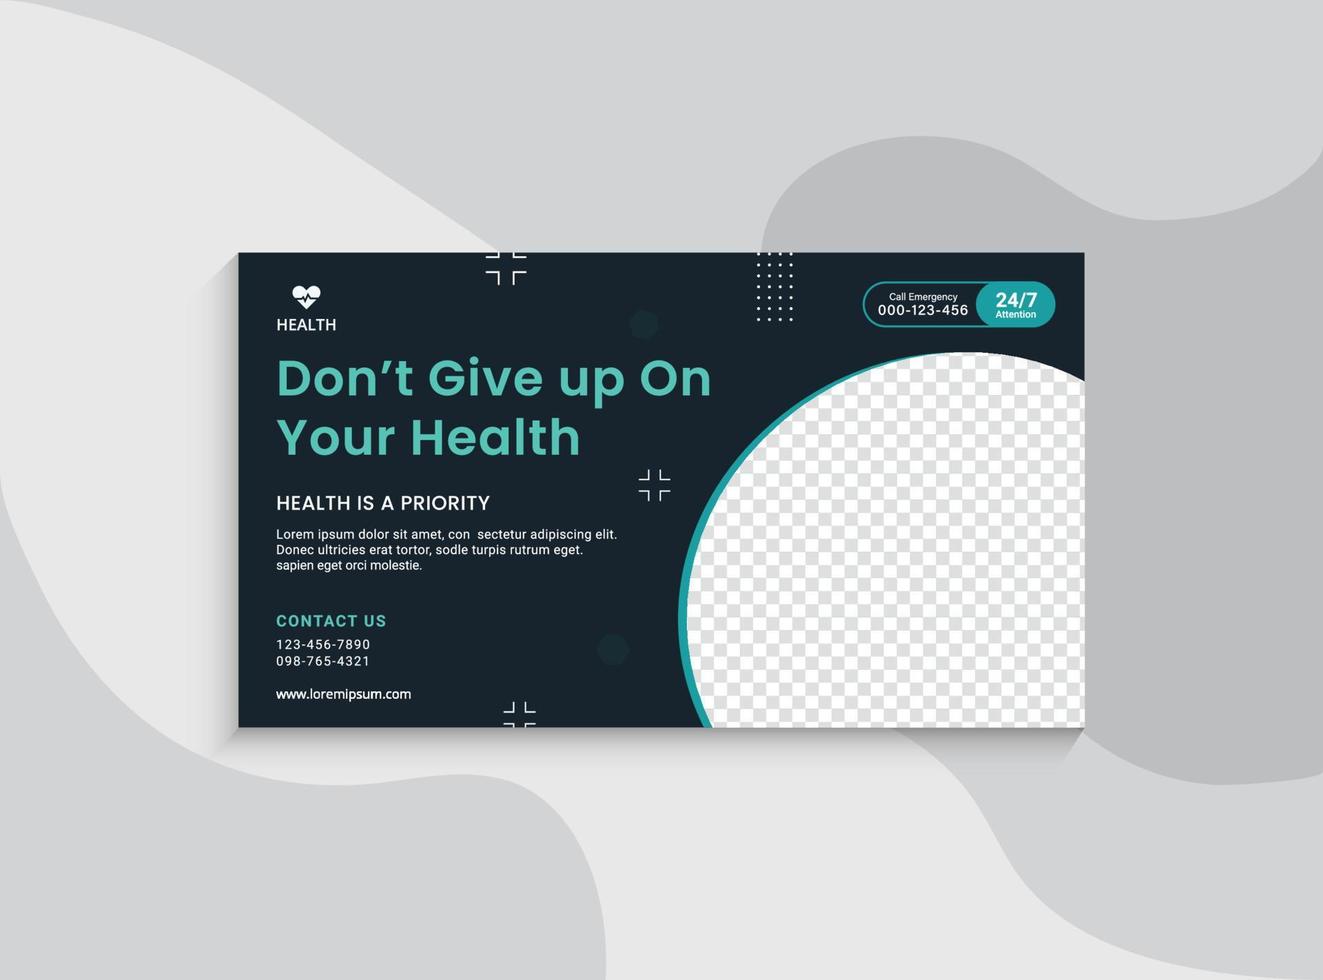 Video thumbnail for Medical healthcare and web banner template. Promotion banner design for live business workshop. Video cover for doctor. Health clinic social media health service vector layout.